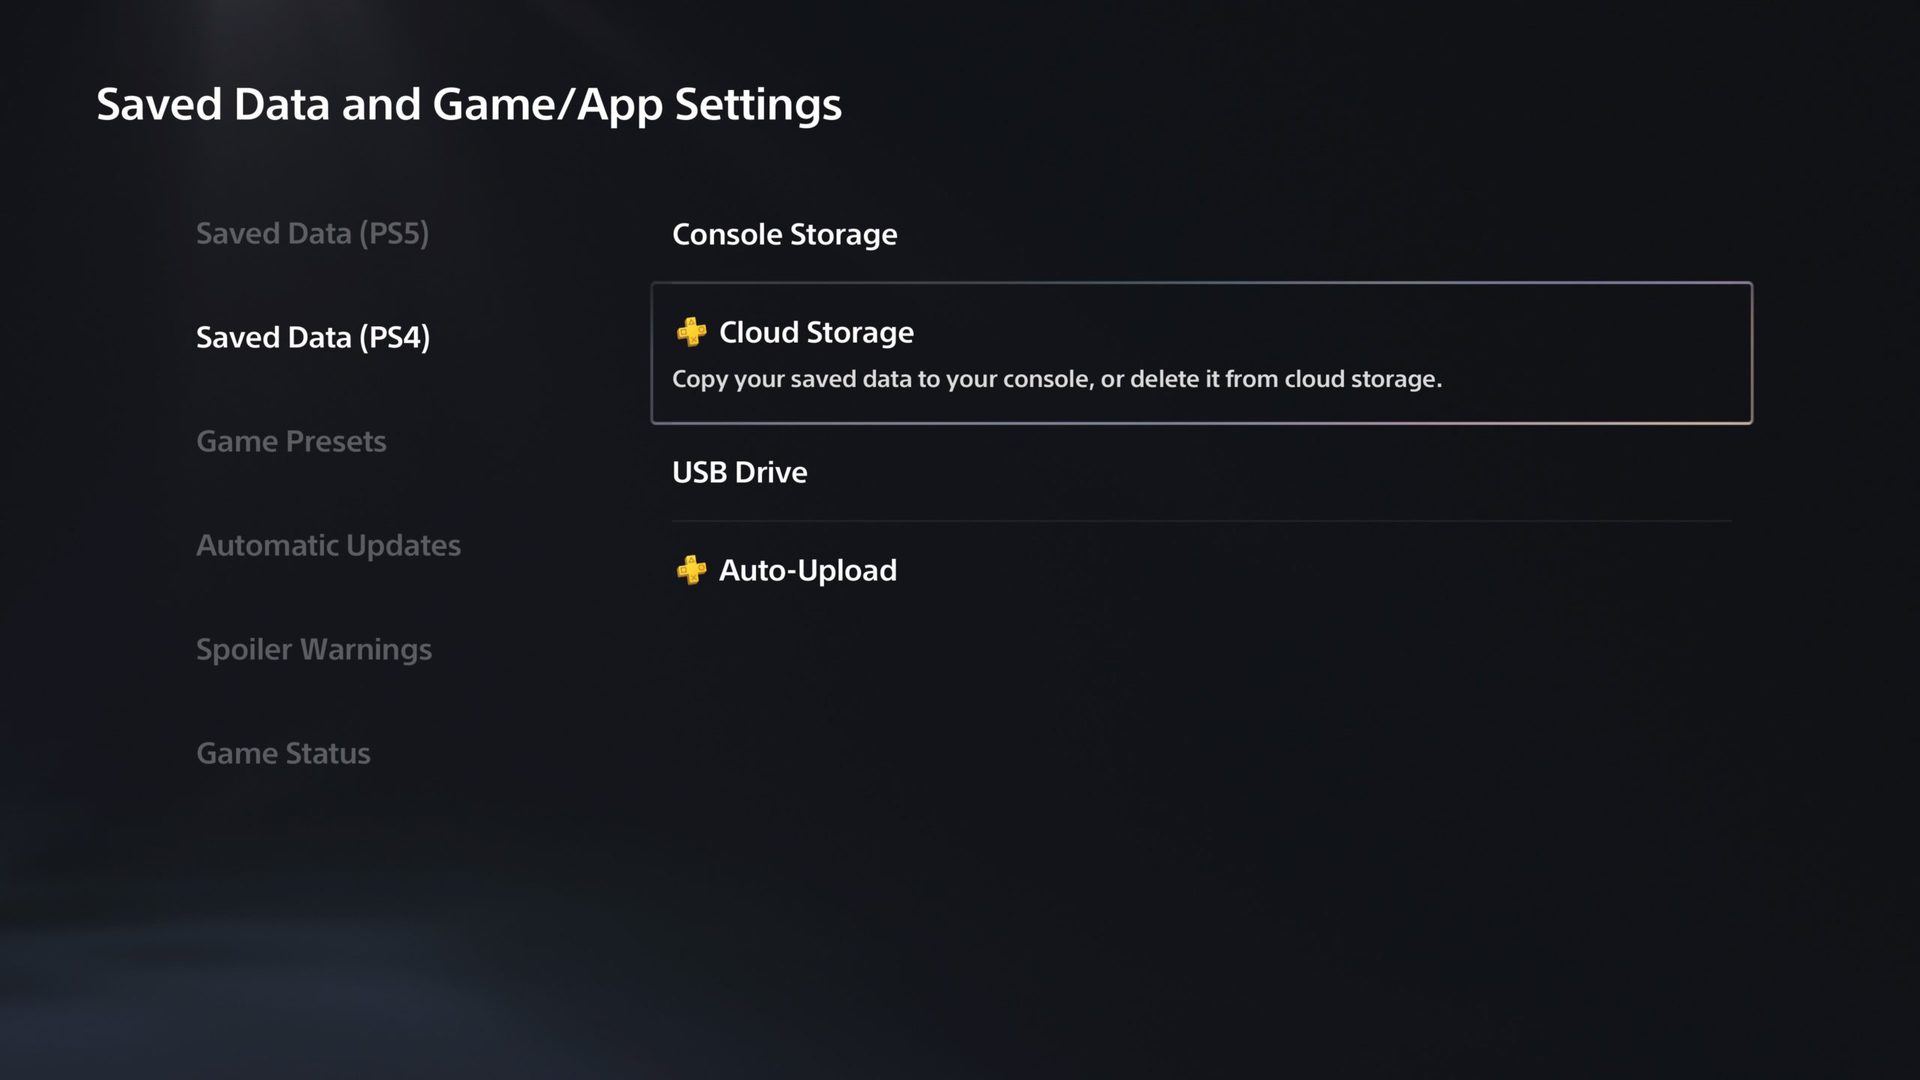 Playstation 5 saved data and game app settings